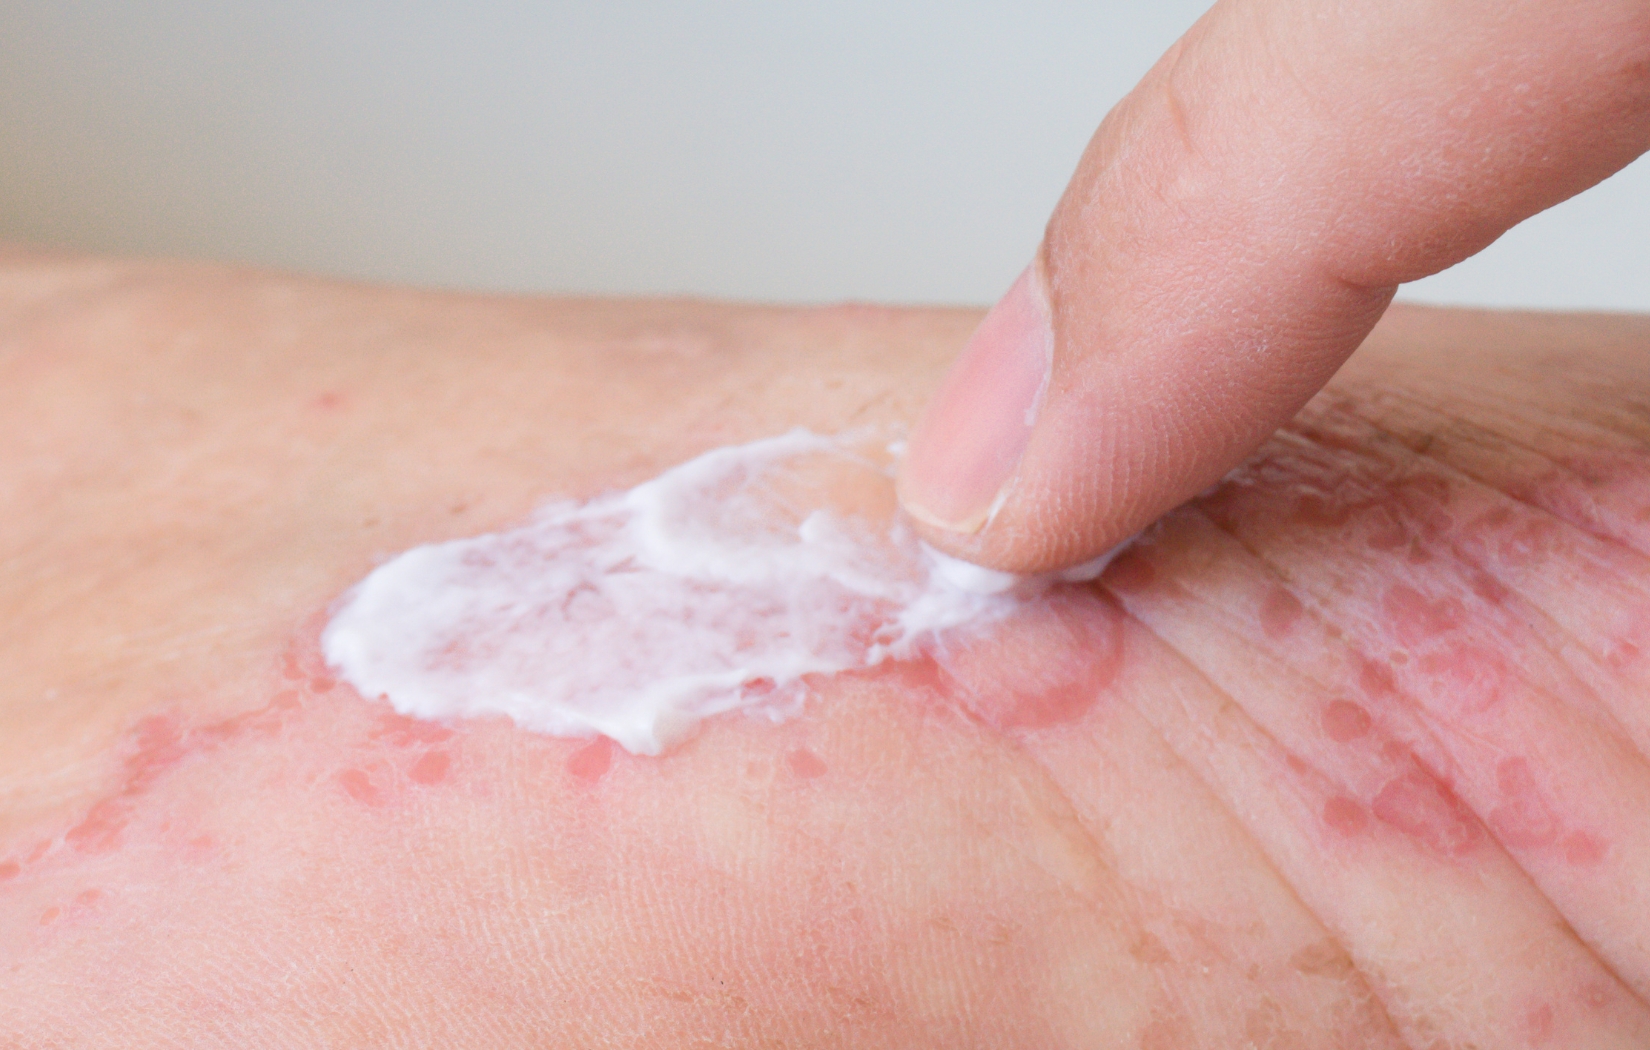 Applying Topical Treatments for Eczema